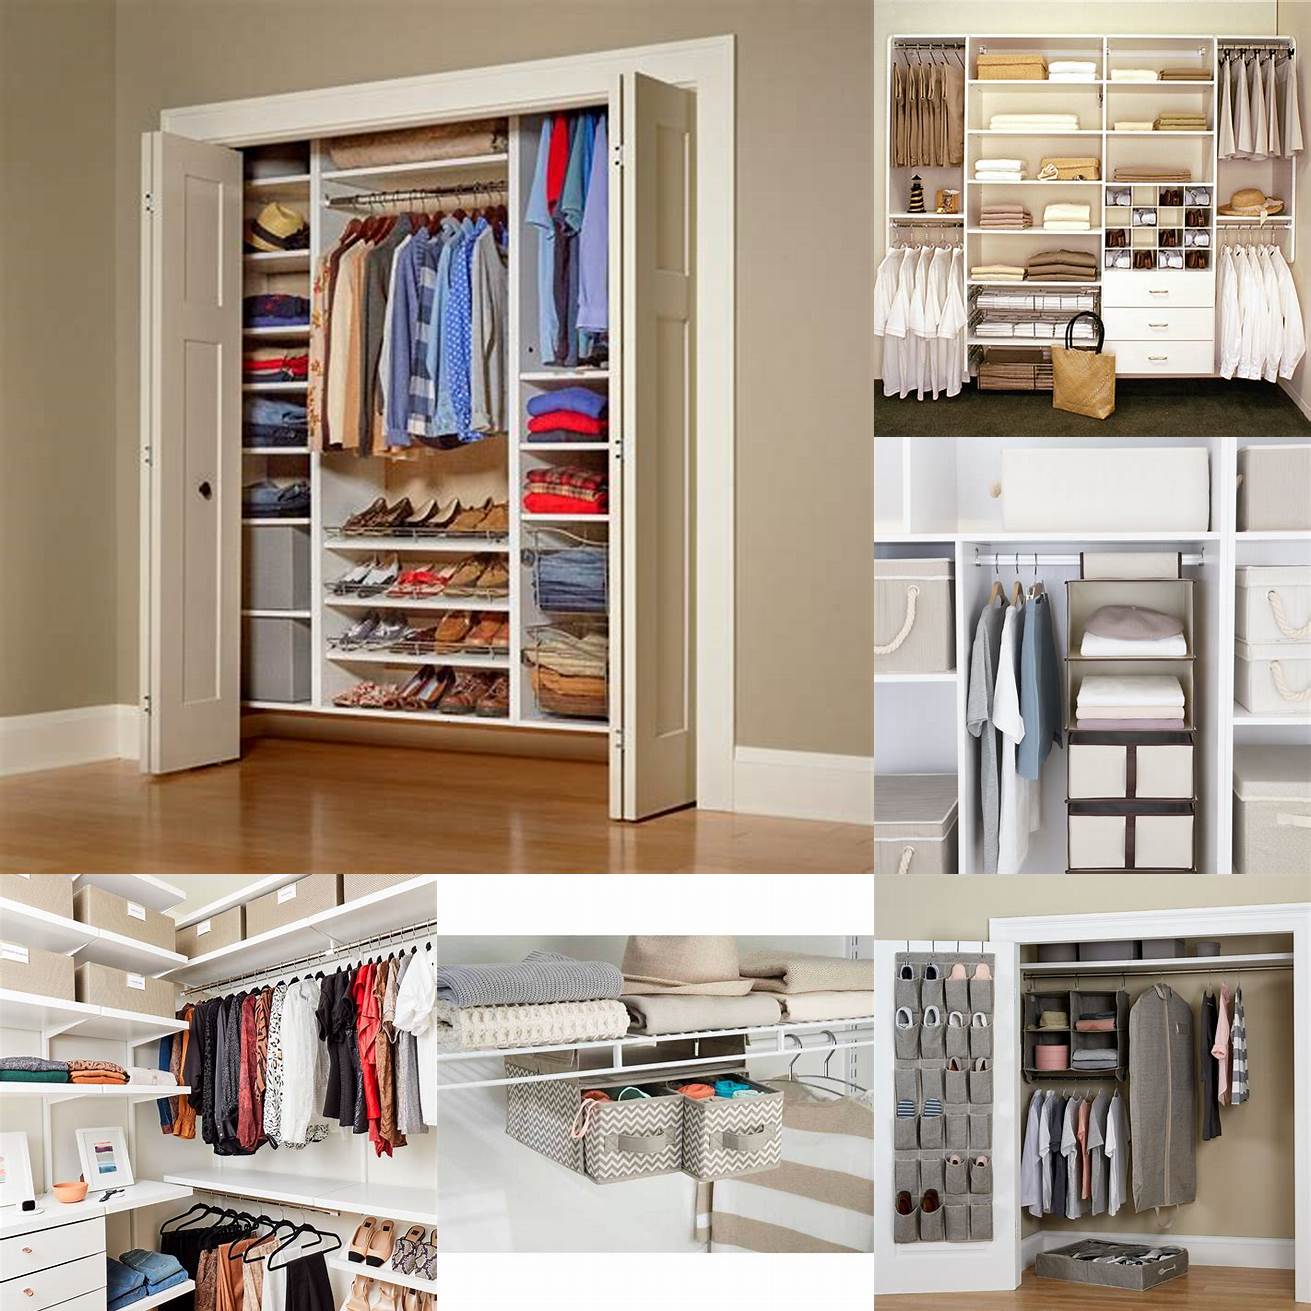 2 Closet Organizer a set of shelves rods and drawers that can be installed inside a closet to maximize its storage space